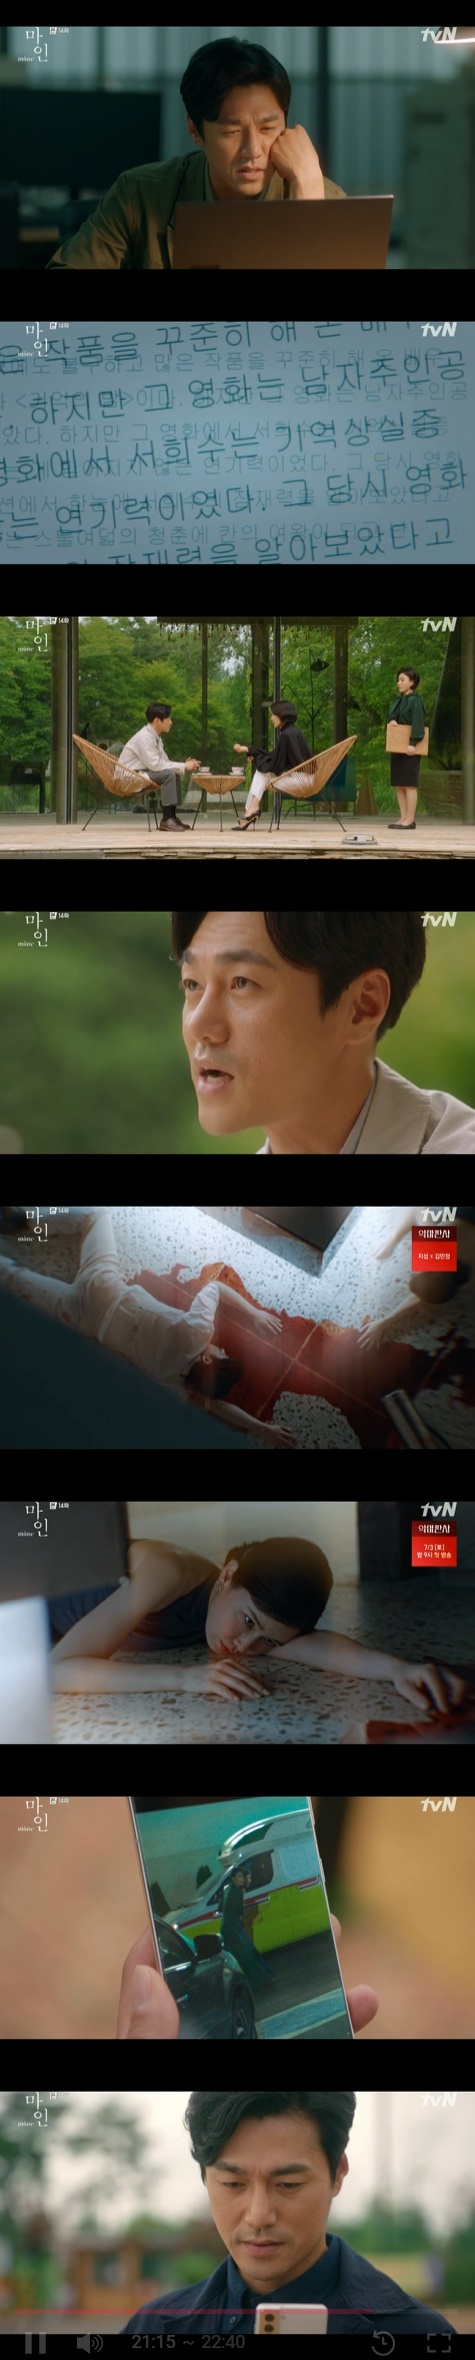 Lee Hyeonwuk dug up deathIn the TVN Saturday drama Mine, which aired on the 20th, Han Ji-yong (Lee Hyeonwuk) was shown to persistently dig into the death accident.On that day, Han met with Han (Chung Dong-hwan). Han told Han Ji-yong, I will be your real father from today. I will do what I have to do as an abby. Put it down. Put it down.If you do something wrong, you apologize and live as a new person. You can start again enough. You can wash it away. Han Ji-yong turned around saying, I can not do that. Han Ji-yong handed the money to Made and asked him to go to the hospital instead of me.Seo Hee-soo called Sister Emma to the place where Kwak Soo-changs brother is hiding, and explained everything Han Ji-yong did, and then said, Han Ji-yong is looking for this person.I will let you know this place and let Han Ji-yong be punished. I will leave everything to the nun. Since then, Sister Emma has visited Han Ji-yong and kneeled down and shed tears. Ji-yong, you have done something you should not do.Why did you do that? Han Ji-yong asked, I have achieved everything that God took away with my strength. There is nothing in this world. Do not pray for me anymore.Instead, please stop Seo Hee-soo. Please stop Seo Hee-soo, who makes me fall. But when Sister Emma did not answer, she was buried. Sister Emma tried to change her mind again, saying, The Lord loves you.Han Ji-yong replied, Well, tell God, abandon me.Meanwhile, Han Jin-ho (Park Hyeok-kwon) was informed that he had caught the real criminal who killed Kwak Soo-chang and said, Han Ji-yong did it.Cho Bum-gu, who was caught in the murder of Kwak Soo-chang, admitted his sins because he offered a sum that Han Ji-yong ignored on condition that he was quiet.Han Jin-ho said at the police station, Cho Bum-gu would have received a lot of money. There was a cannon phone, but I could not find it.I started to feel extremely anxious. A few days before I died. I felt like I had some big weakness. Seo Hee-soo, who lost Memory, said at a family meal, Do not you think Ha Joon should send her and Ha Joon back to the United States? Lee Hye-jin, who Ha Joon gave birth to, is her mother.Ha Joon is dead. Im not involved. Theres no reason for him to be here. I have to leave this house soon.Then one chairman replied: Here you grow Ha Joon - let the tutor go.But Seo Hee-soo said, It is right for my mother to raise it. Jeong Seohyun said, Memory will come back soon. Hang in a little.So Seo Hee-soo said, Im afraid Memory will come back. What did you see?As Detective said, someone might have killed Ha Joon, Father. Seo Hee-soo came across the image of Ha Joon (Jung Hyun-joon) who was in a hurry, saying, It is sadder that my mother can not remember me than her mother leaves me.Seo Hee-soo then visited Sister Emma (Jesus Jeong); Seo Hee-soo said, It took me a whole day to read the text I shared with the nun; the last text I shared with the nun met with Ha Joon Father.Tell me everything honestly. He did not answer this letter. Please answer that now.Sister Emma said, Every time Ji Yong thought, I was sick. I looked at her birth and growth from afar.But if Ji Yong had known that there was no place to mind in the house, he said, telling Han Ji-yong that he was abused and hurt.Seo Hee-soo said, The nun is sorry for him? And Sister Emma replied, I feel sorry for her soul.Seo Hee-soo said, I said you saw me at the scene. Why did not you report it?Sister Emma said, In fact, I doubted Seo Hee-soo. But she said that she was missing Memory.I thought that there was someone else at that time, and maybe Mr. Hee-soo could be a victim. Seo Hee-soo said, Do you believe me? Detective found out that while proceeding with Susa, Seo Hee-soo made perfect memory loss Acting in Memory Night.He demanded a hospital record investigation and suspected, Maybe I am doing Seo Hee-soo Acting now.At that time, Seohyun suggested to Seo Hee-soo to go to see art paintings, and Seo Hee-soo replied that he had an appointment with his friends.Im meeting people, she smiled.At that moment, a call came to Detective and Jung Seohyun looked at Seo Hee-soo, saying, These people are persistent. Detective told Jeong Seohyun, Is Seo Hee-soos memory really lost Memory?Who was next to him? He would have been hurt a lot. Please kick his arm. Jung Seohyun said, I was hurt while working. At that moment, Detective, who was investigating Seo Hee-soos medical records, called and said, It is Seo Hee-soo who was lying down with Han Ji-yong.I was seriously injured, he said.Detective informed him of this fact, and he looked calm. Detective said, It is a face that knew everything.Then Seo Hee-soo could lose his Memory Detective told Lee Hye-jin (Ok Ja-yeon): Who took Seo Hee-soo to the hospital? Who is Seo Hee-soos car when he entered the hospital?I am looking for who came with me in the nearby black box. Lee Hye-jin replied, I was in Boston with Ha Joon, and Detective was angry not to lie.However, Lee Hye-jin laughed and left the place saying, Look again.Later, Detective went to meet Ha Joon with Seo Hee-soo, and Seo Hee-soo saved Ha Joon, who almost got into an accident while crossing the crosswalk.I said that you are the one who can protect you, he said, raising his throat and Han Ha Joon was happy to say Mom to Seo Hee-soo.Detective watched from afar, and Detective found out that it was not Lee Hye-jin but Jung Seohyun who took Seo Hee-soo to the hospital on the day of the accident.broadcast screen capture